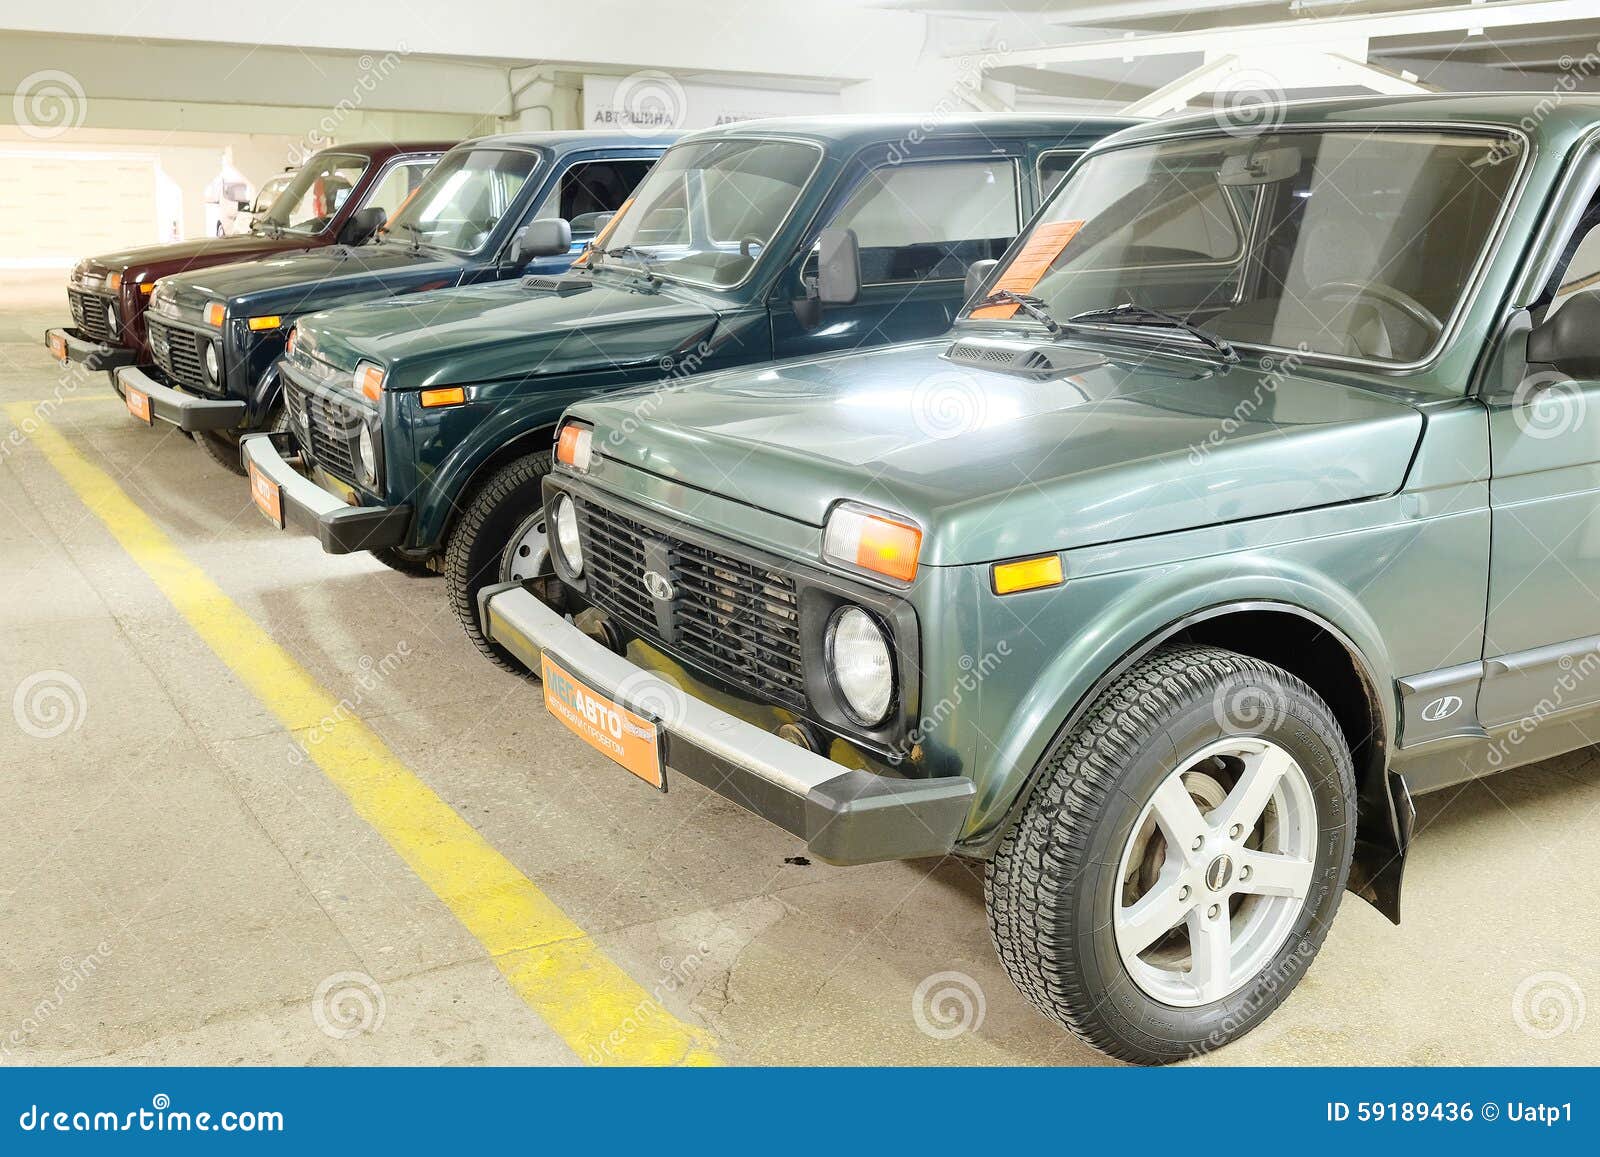 Second-hand Cars in Dealer S Showroom. Editorial Photo - Image of